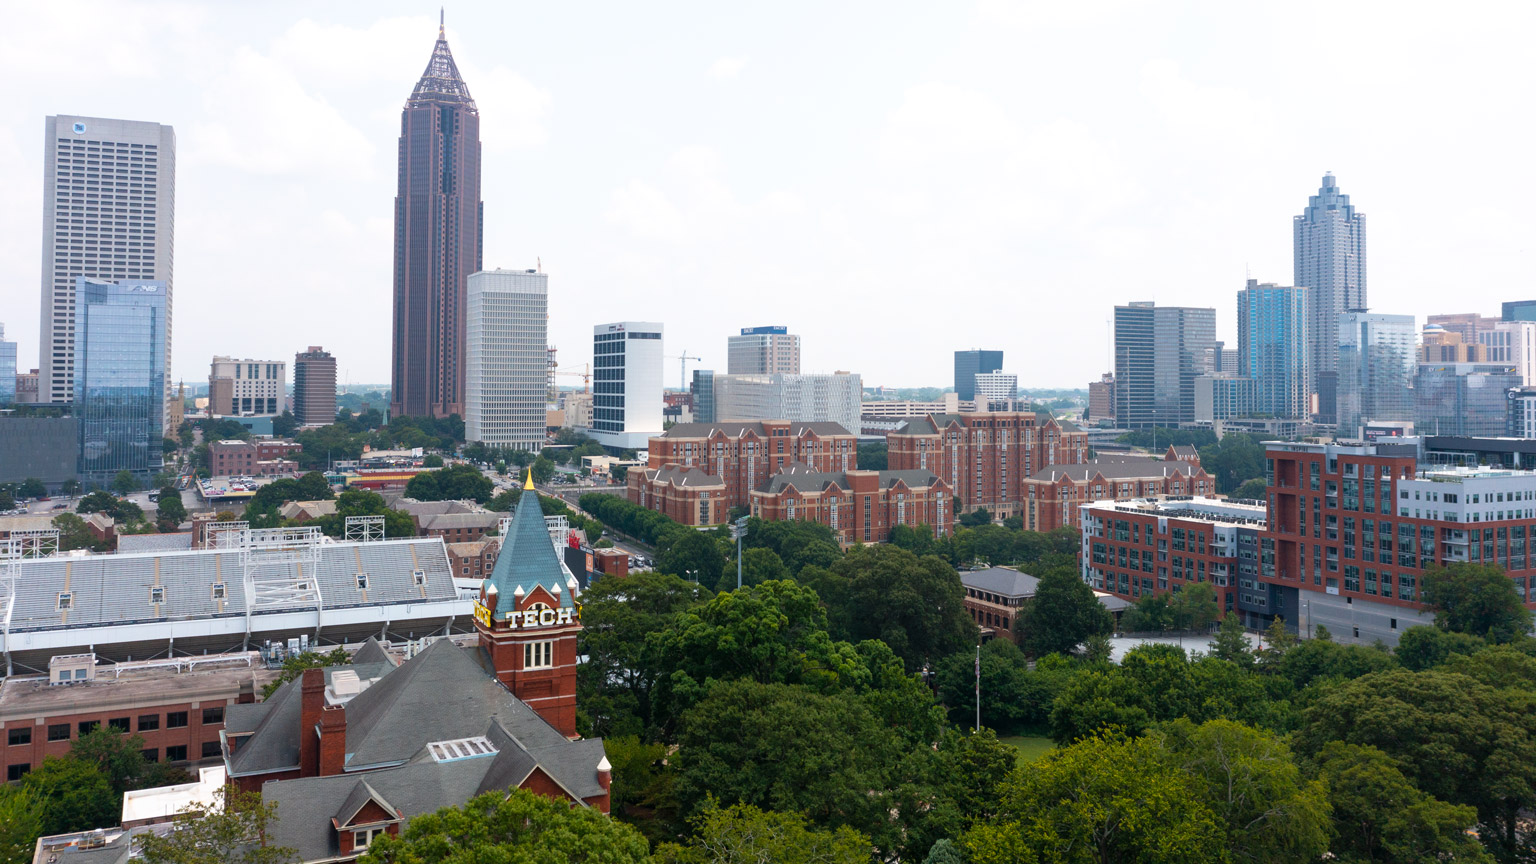 A view of the skyline of Atlanta with Tech Tower in the foreground.